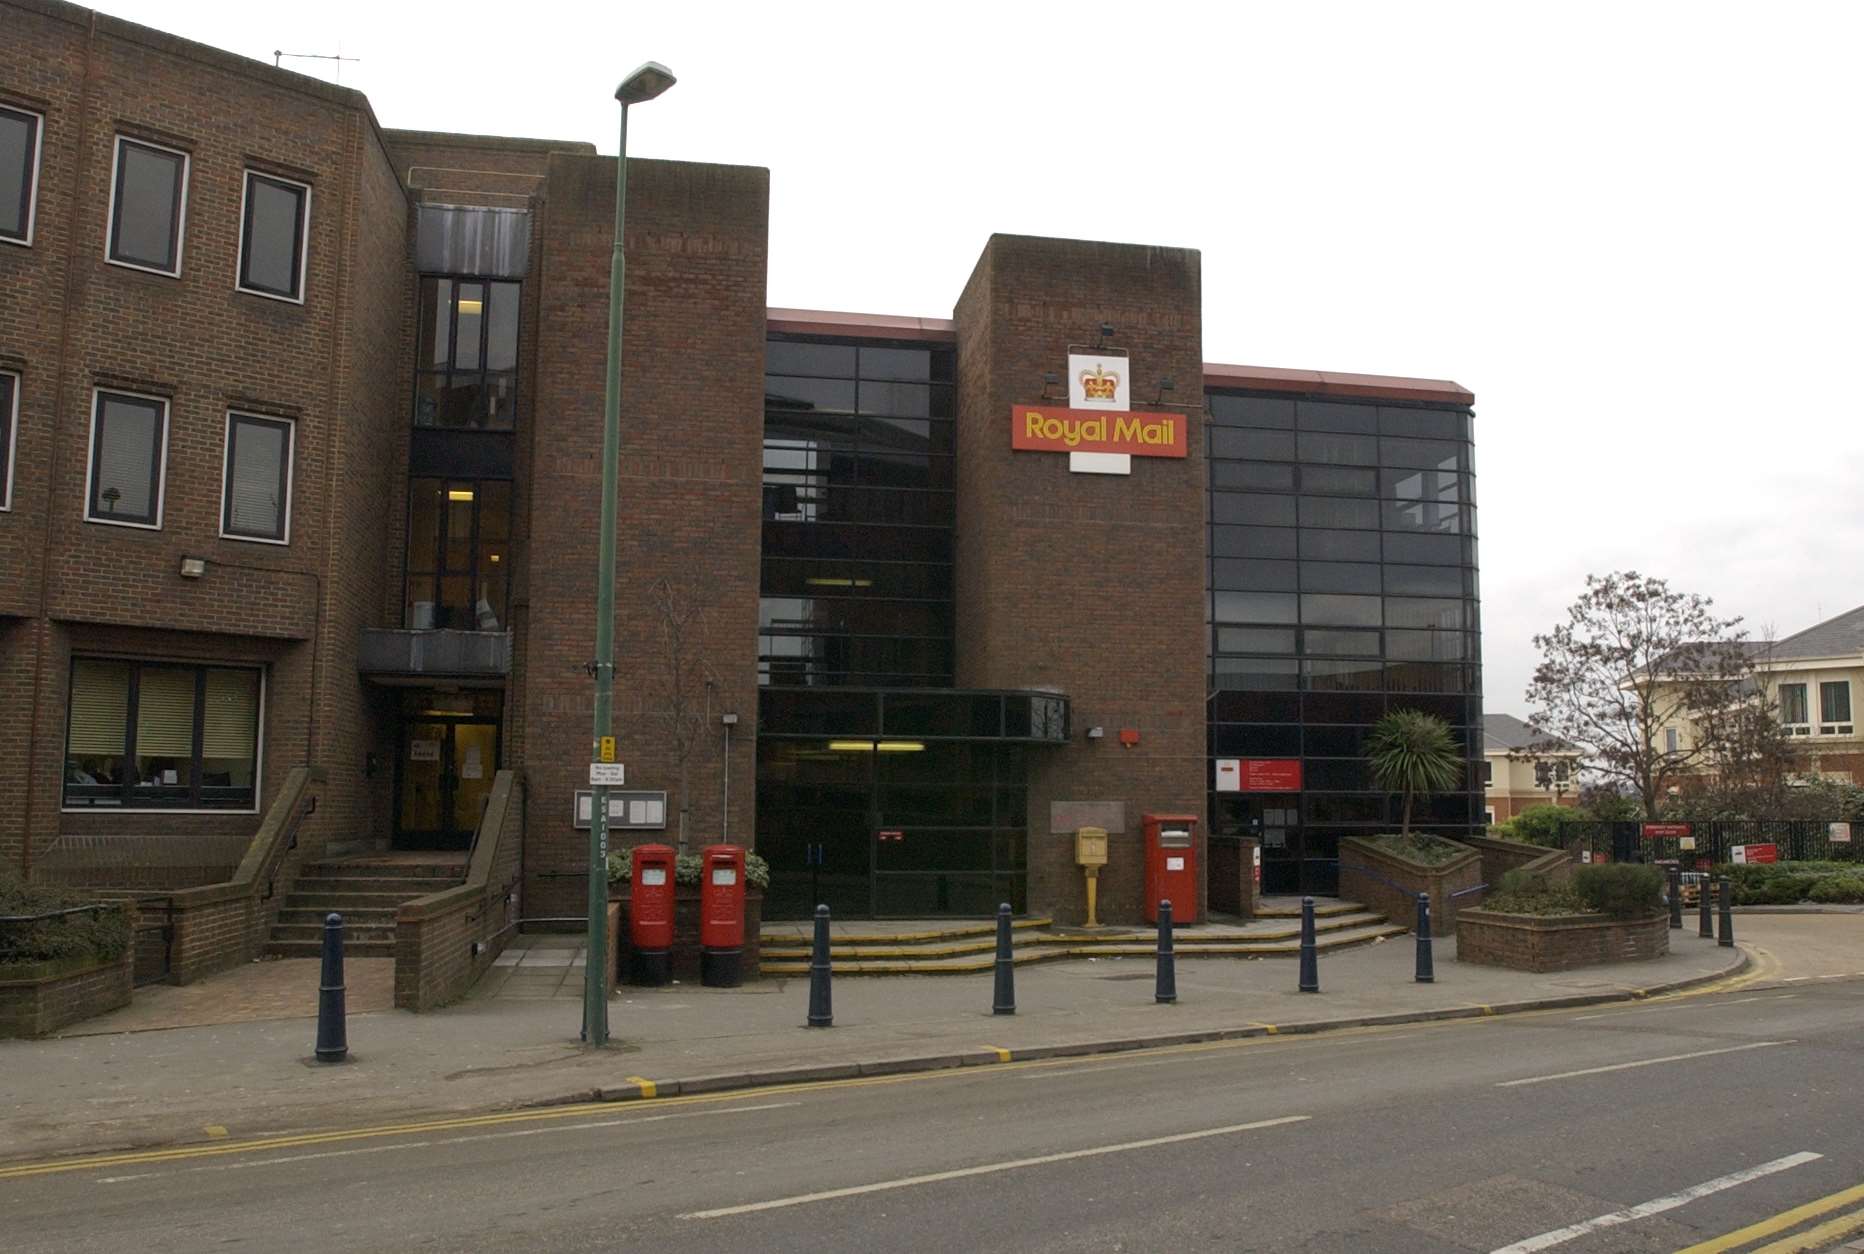 The former Royal Mail sorting office by Maidstone East railway station